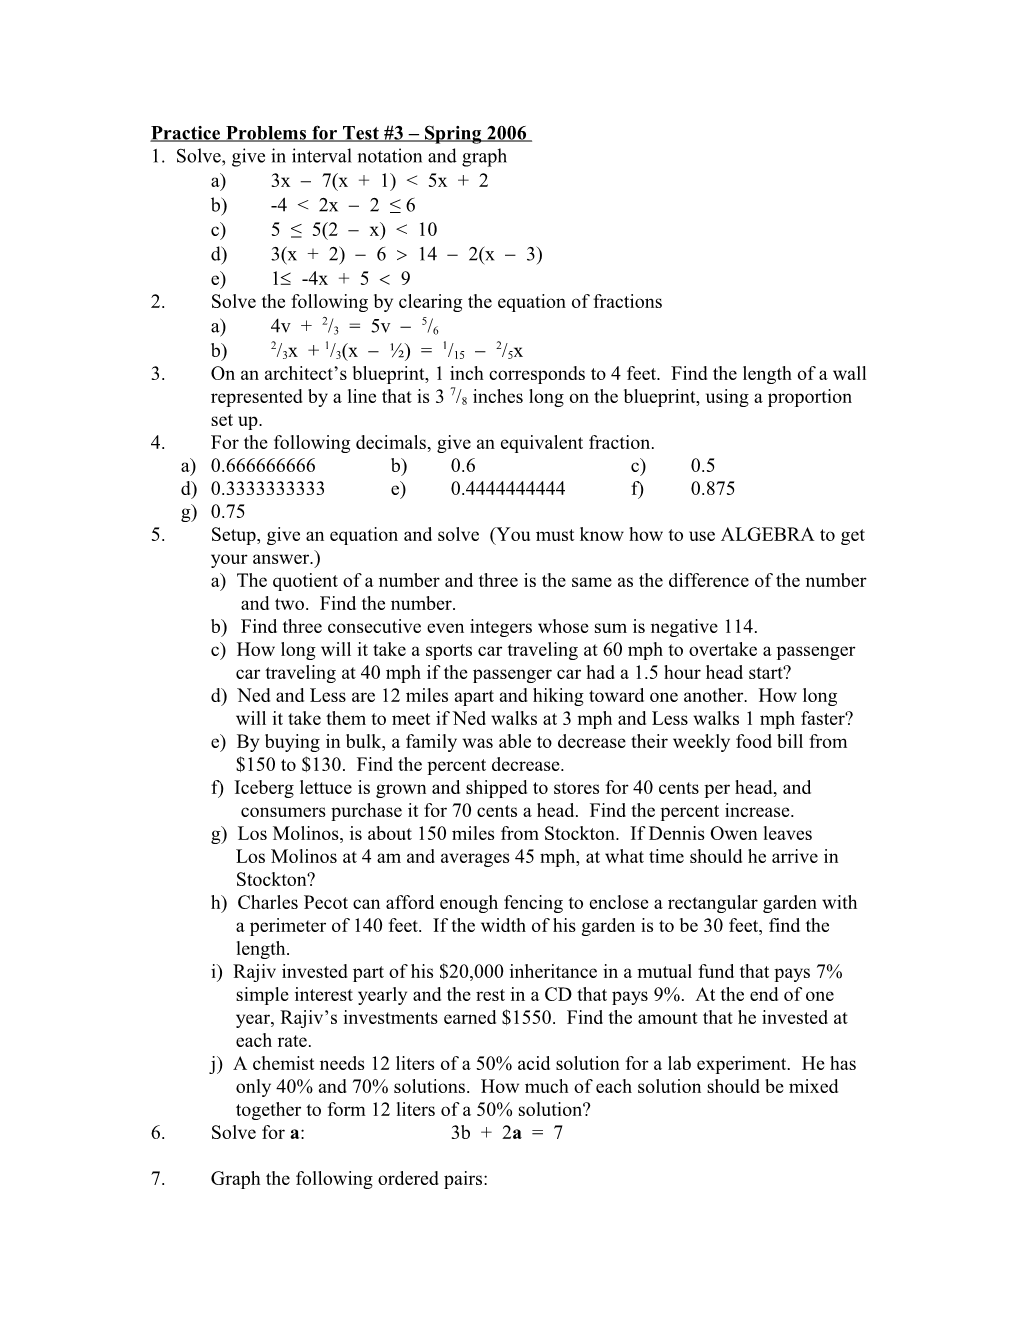 Practice Problems for Test #2 Spring 2006